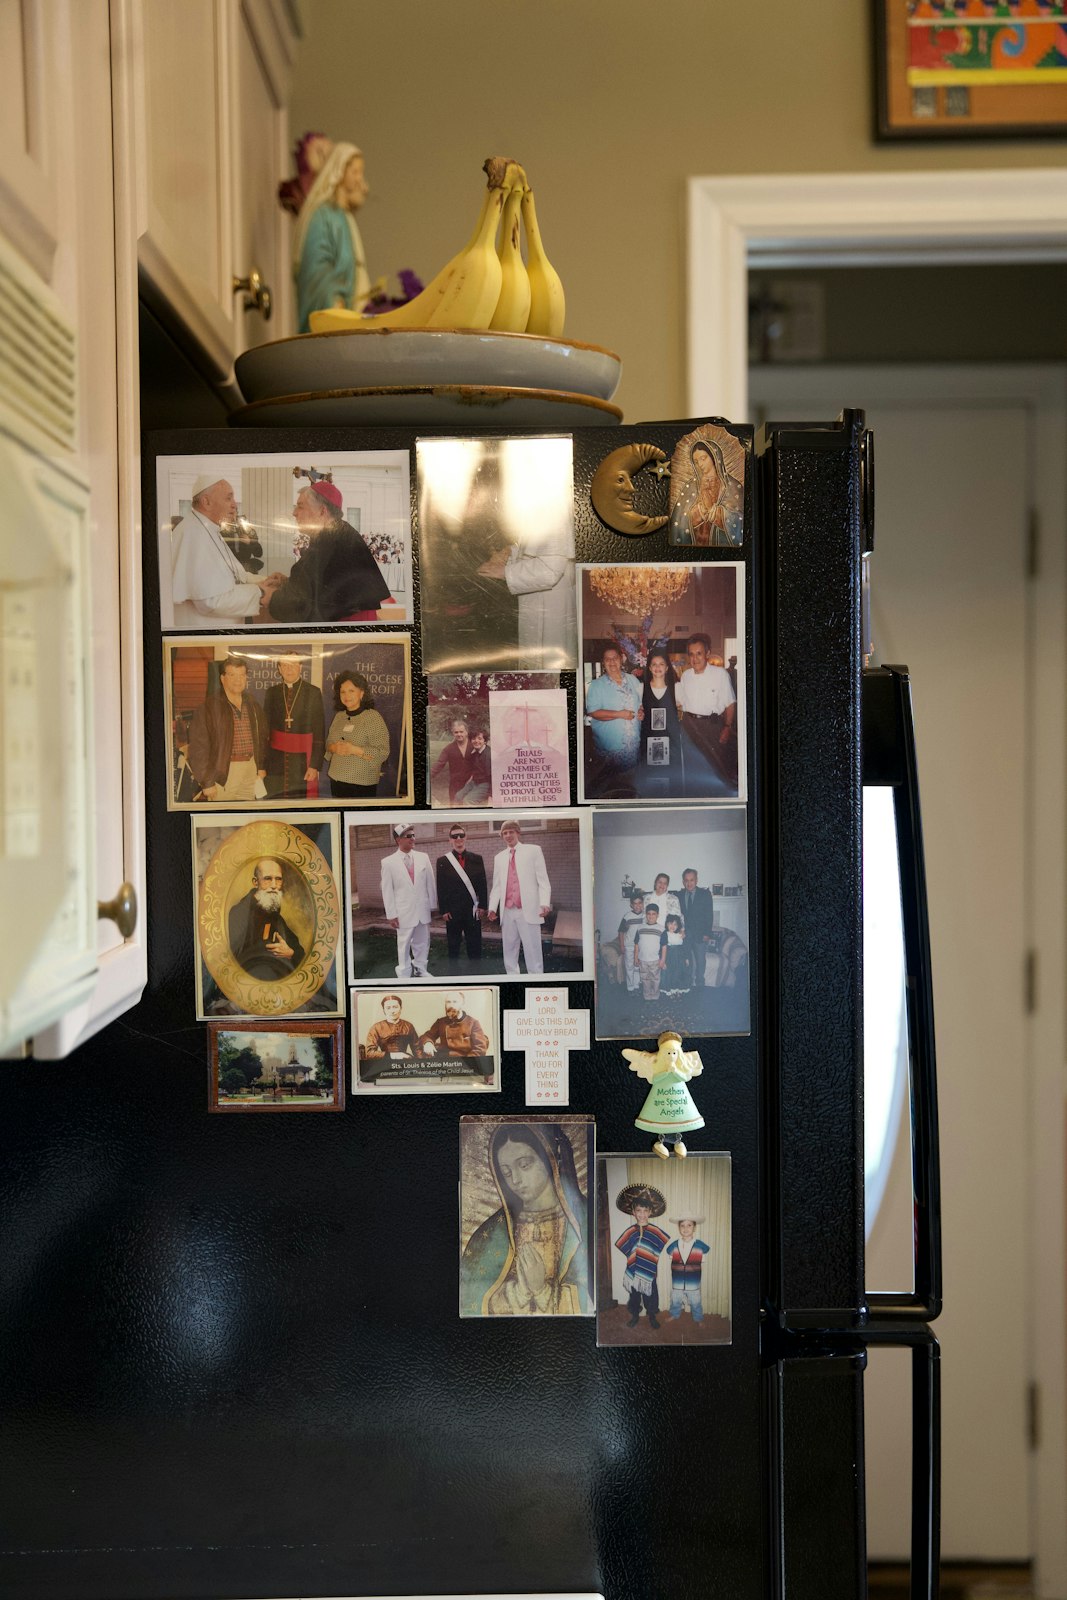 The walls, tables, and even the refrigerator in Truchan's home are covered with pictures of her four adult children and her husband, whom she affectionately refers to as her “beloved husband, Tony.” Pictures of her parents and siblings, who hail from Mexico, and of in-laws from Ukraine are everywhere.